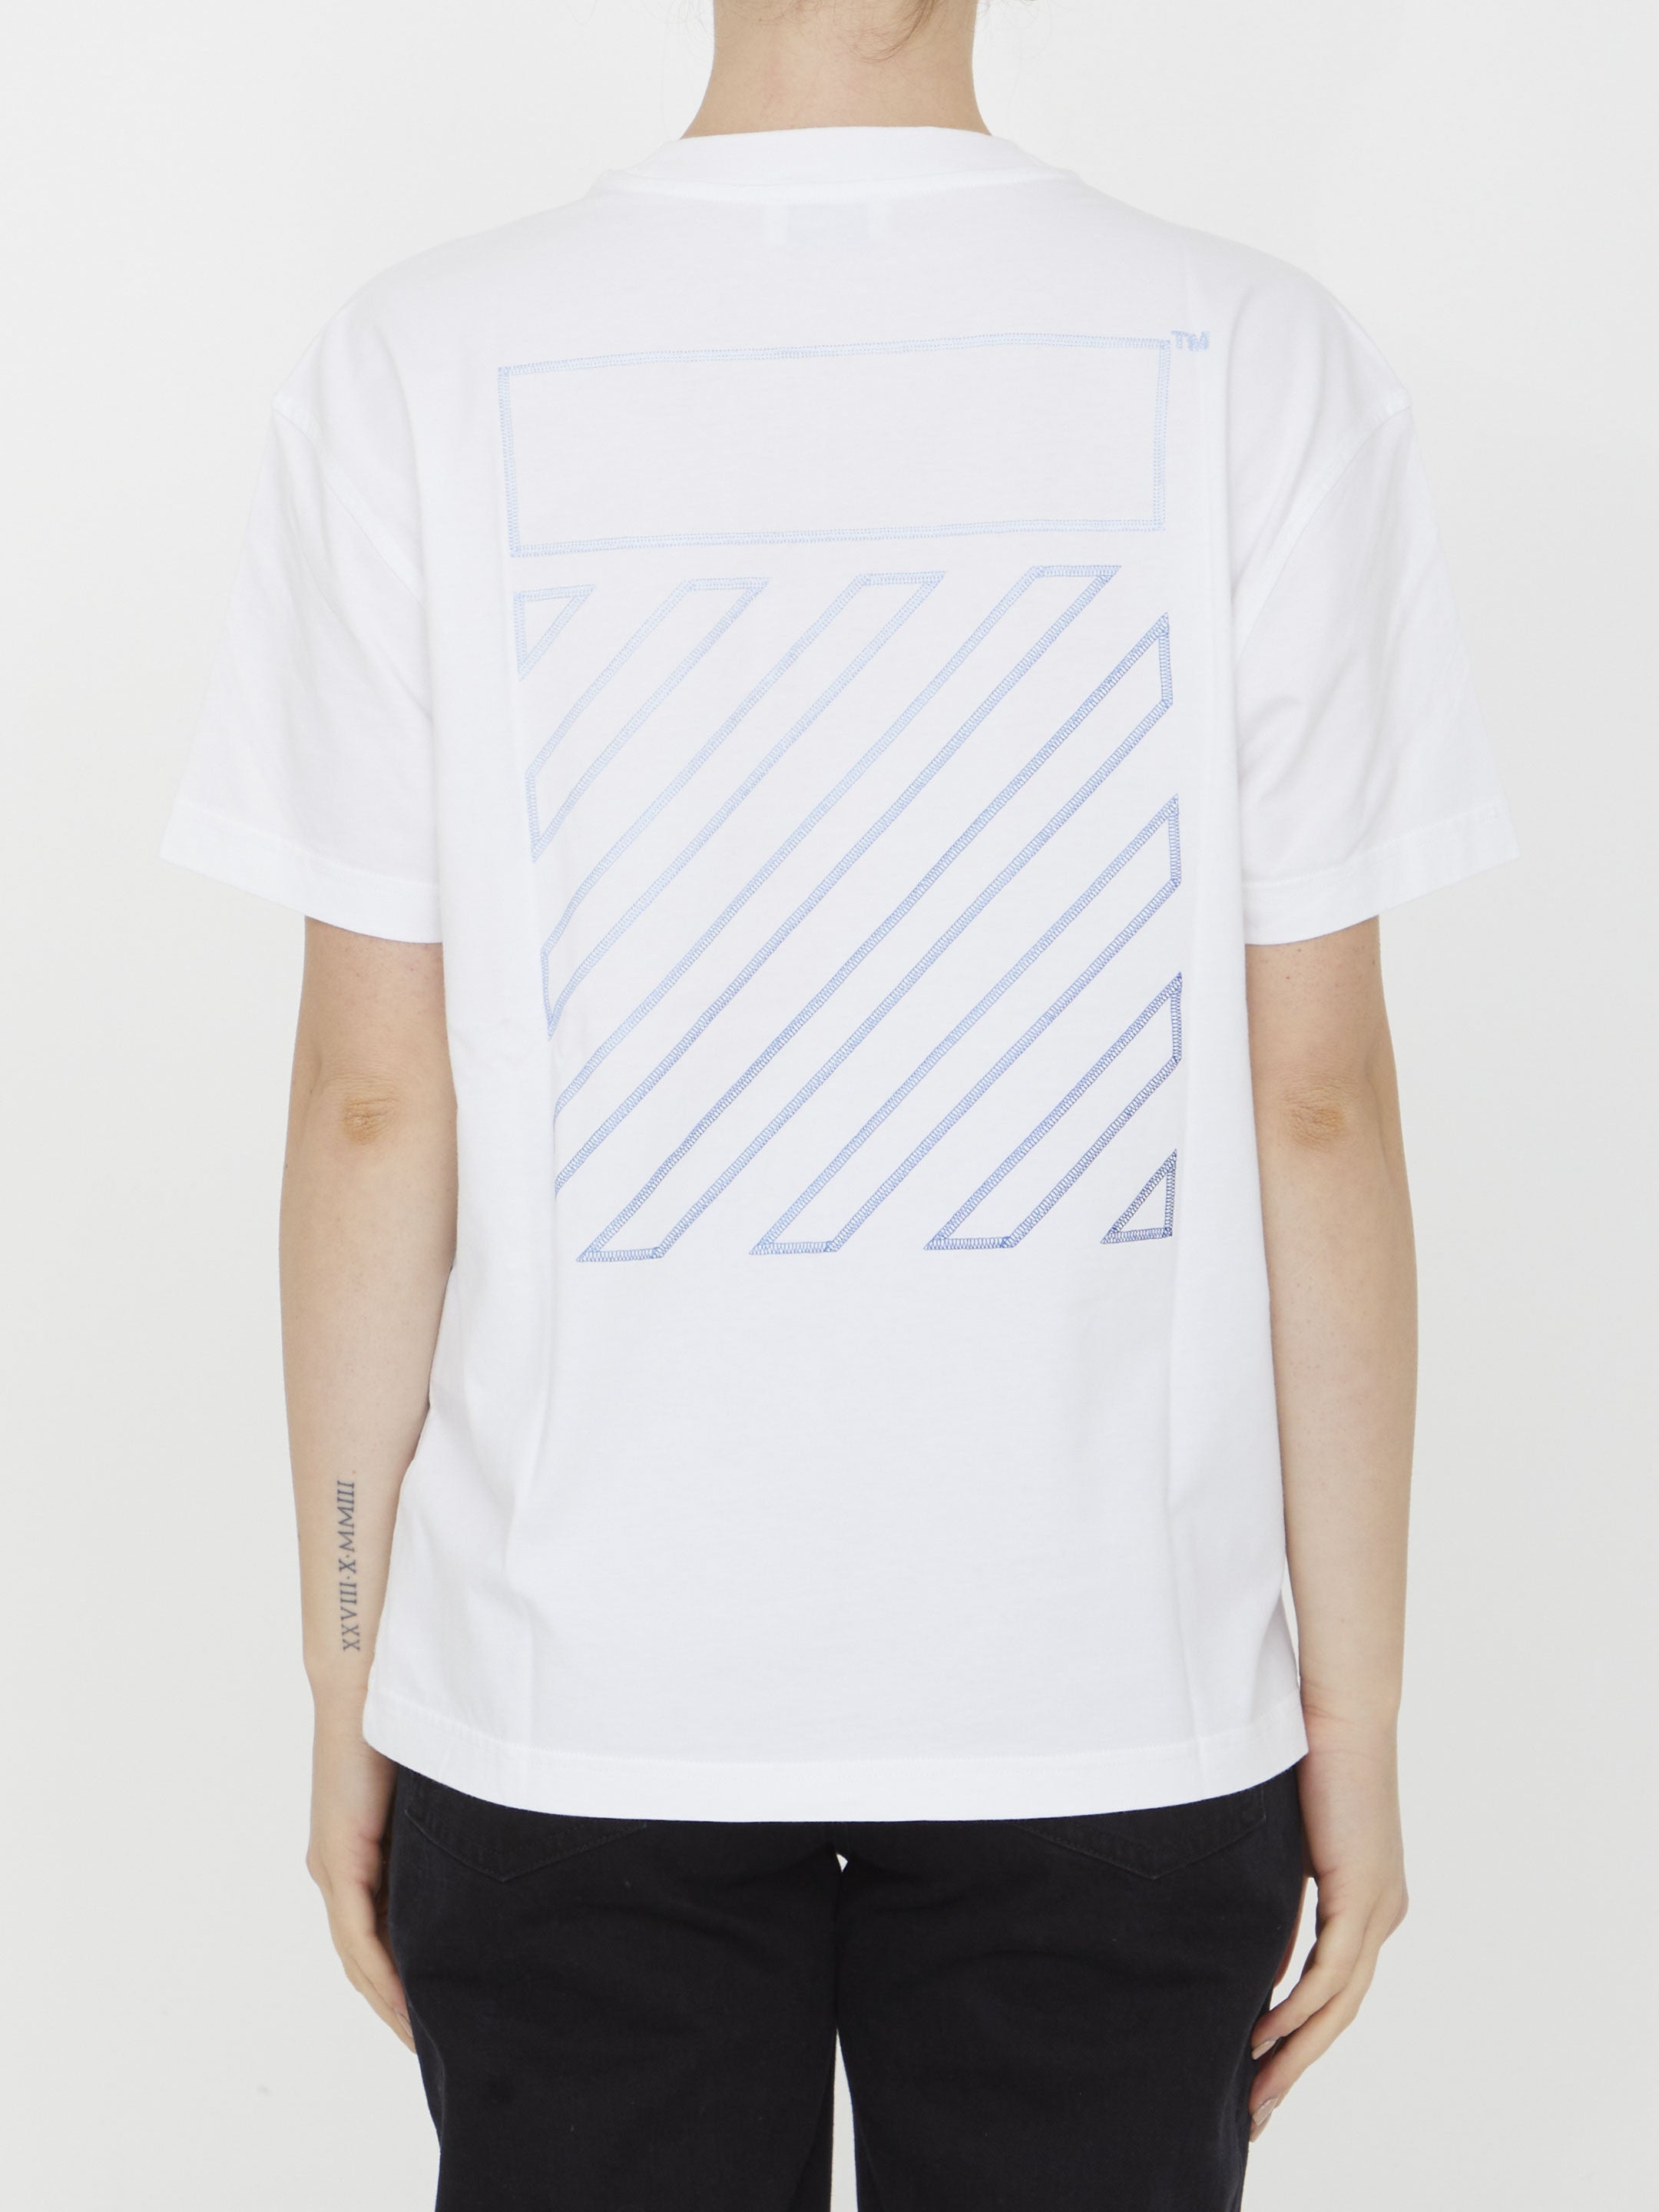 OFF-WHITE-OUTLET-SALE-Diag-Tab-t-shirt-Shirts-XS-WHITE-ARCHIVE-COLLECTION-4.jpg